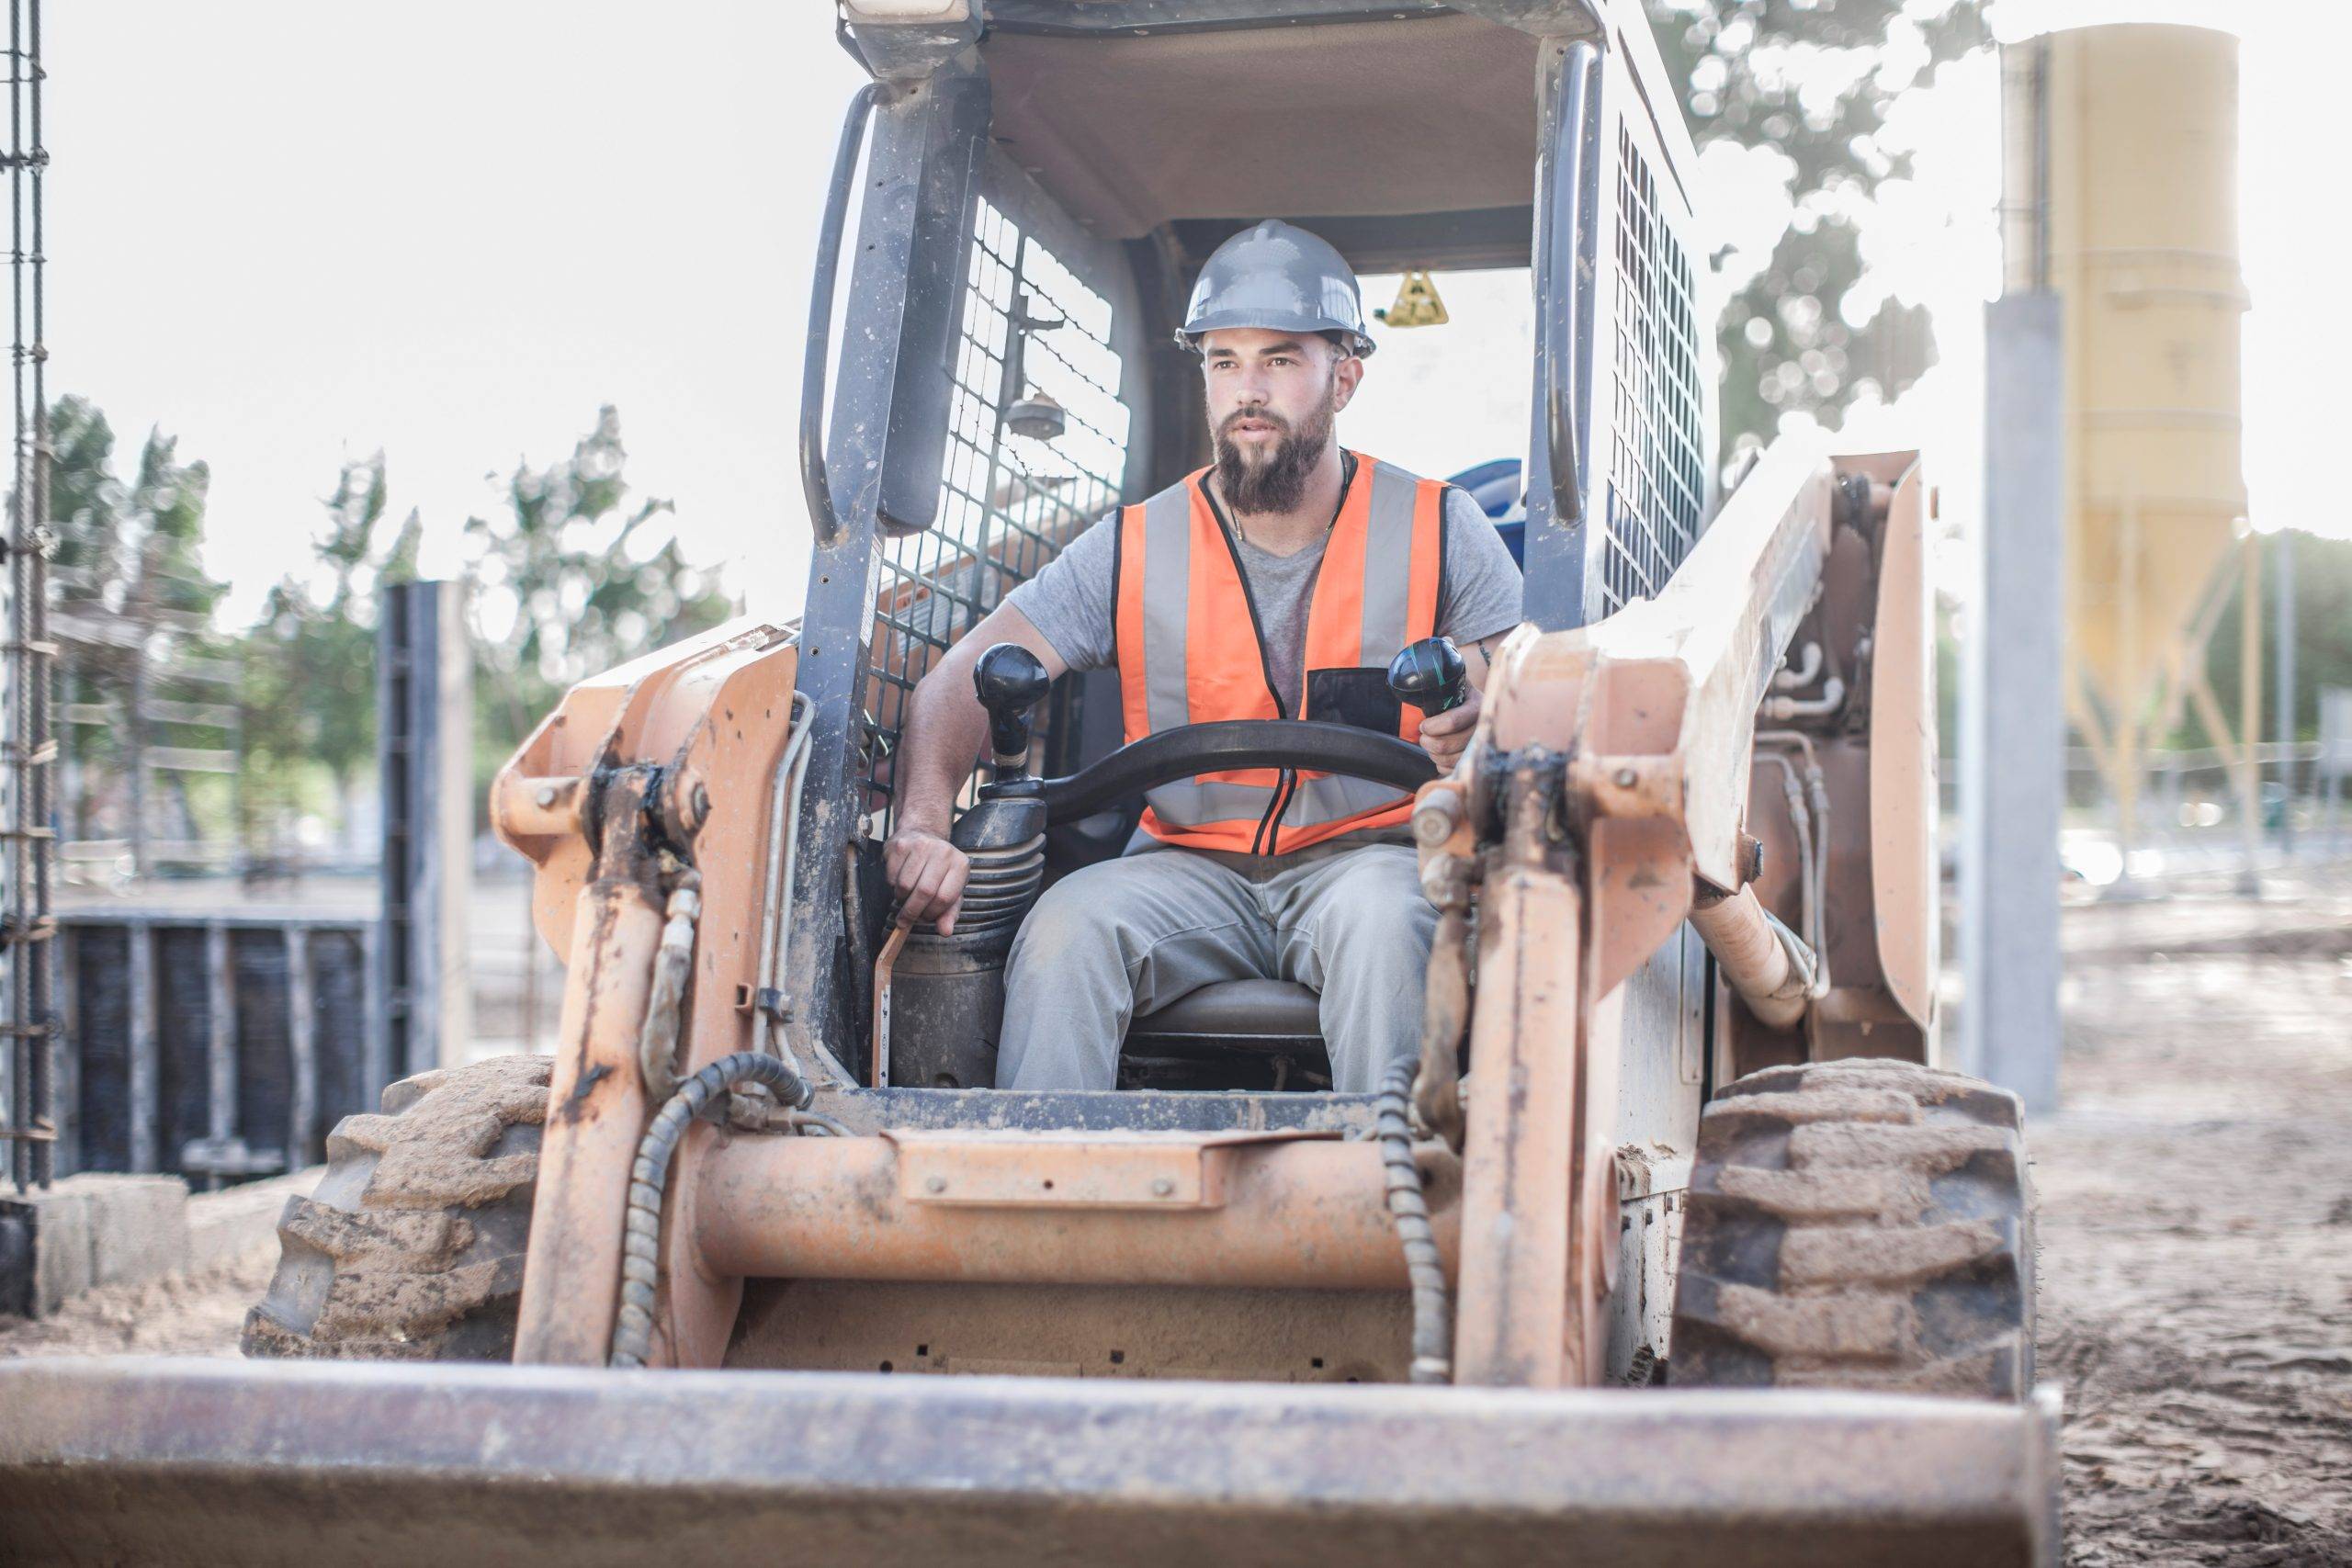 buy a skidsteer and discover opportunities